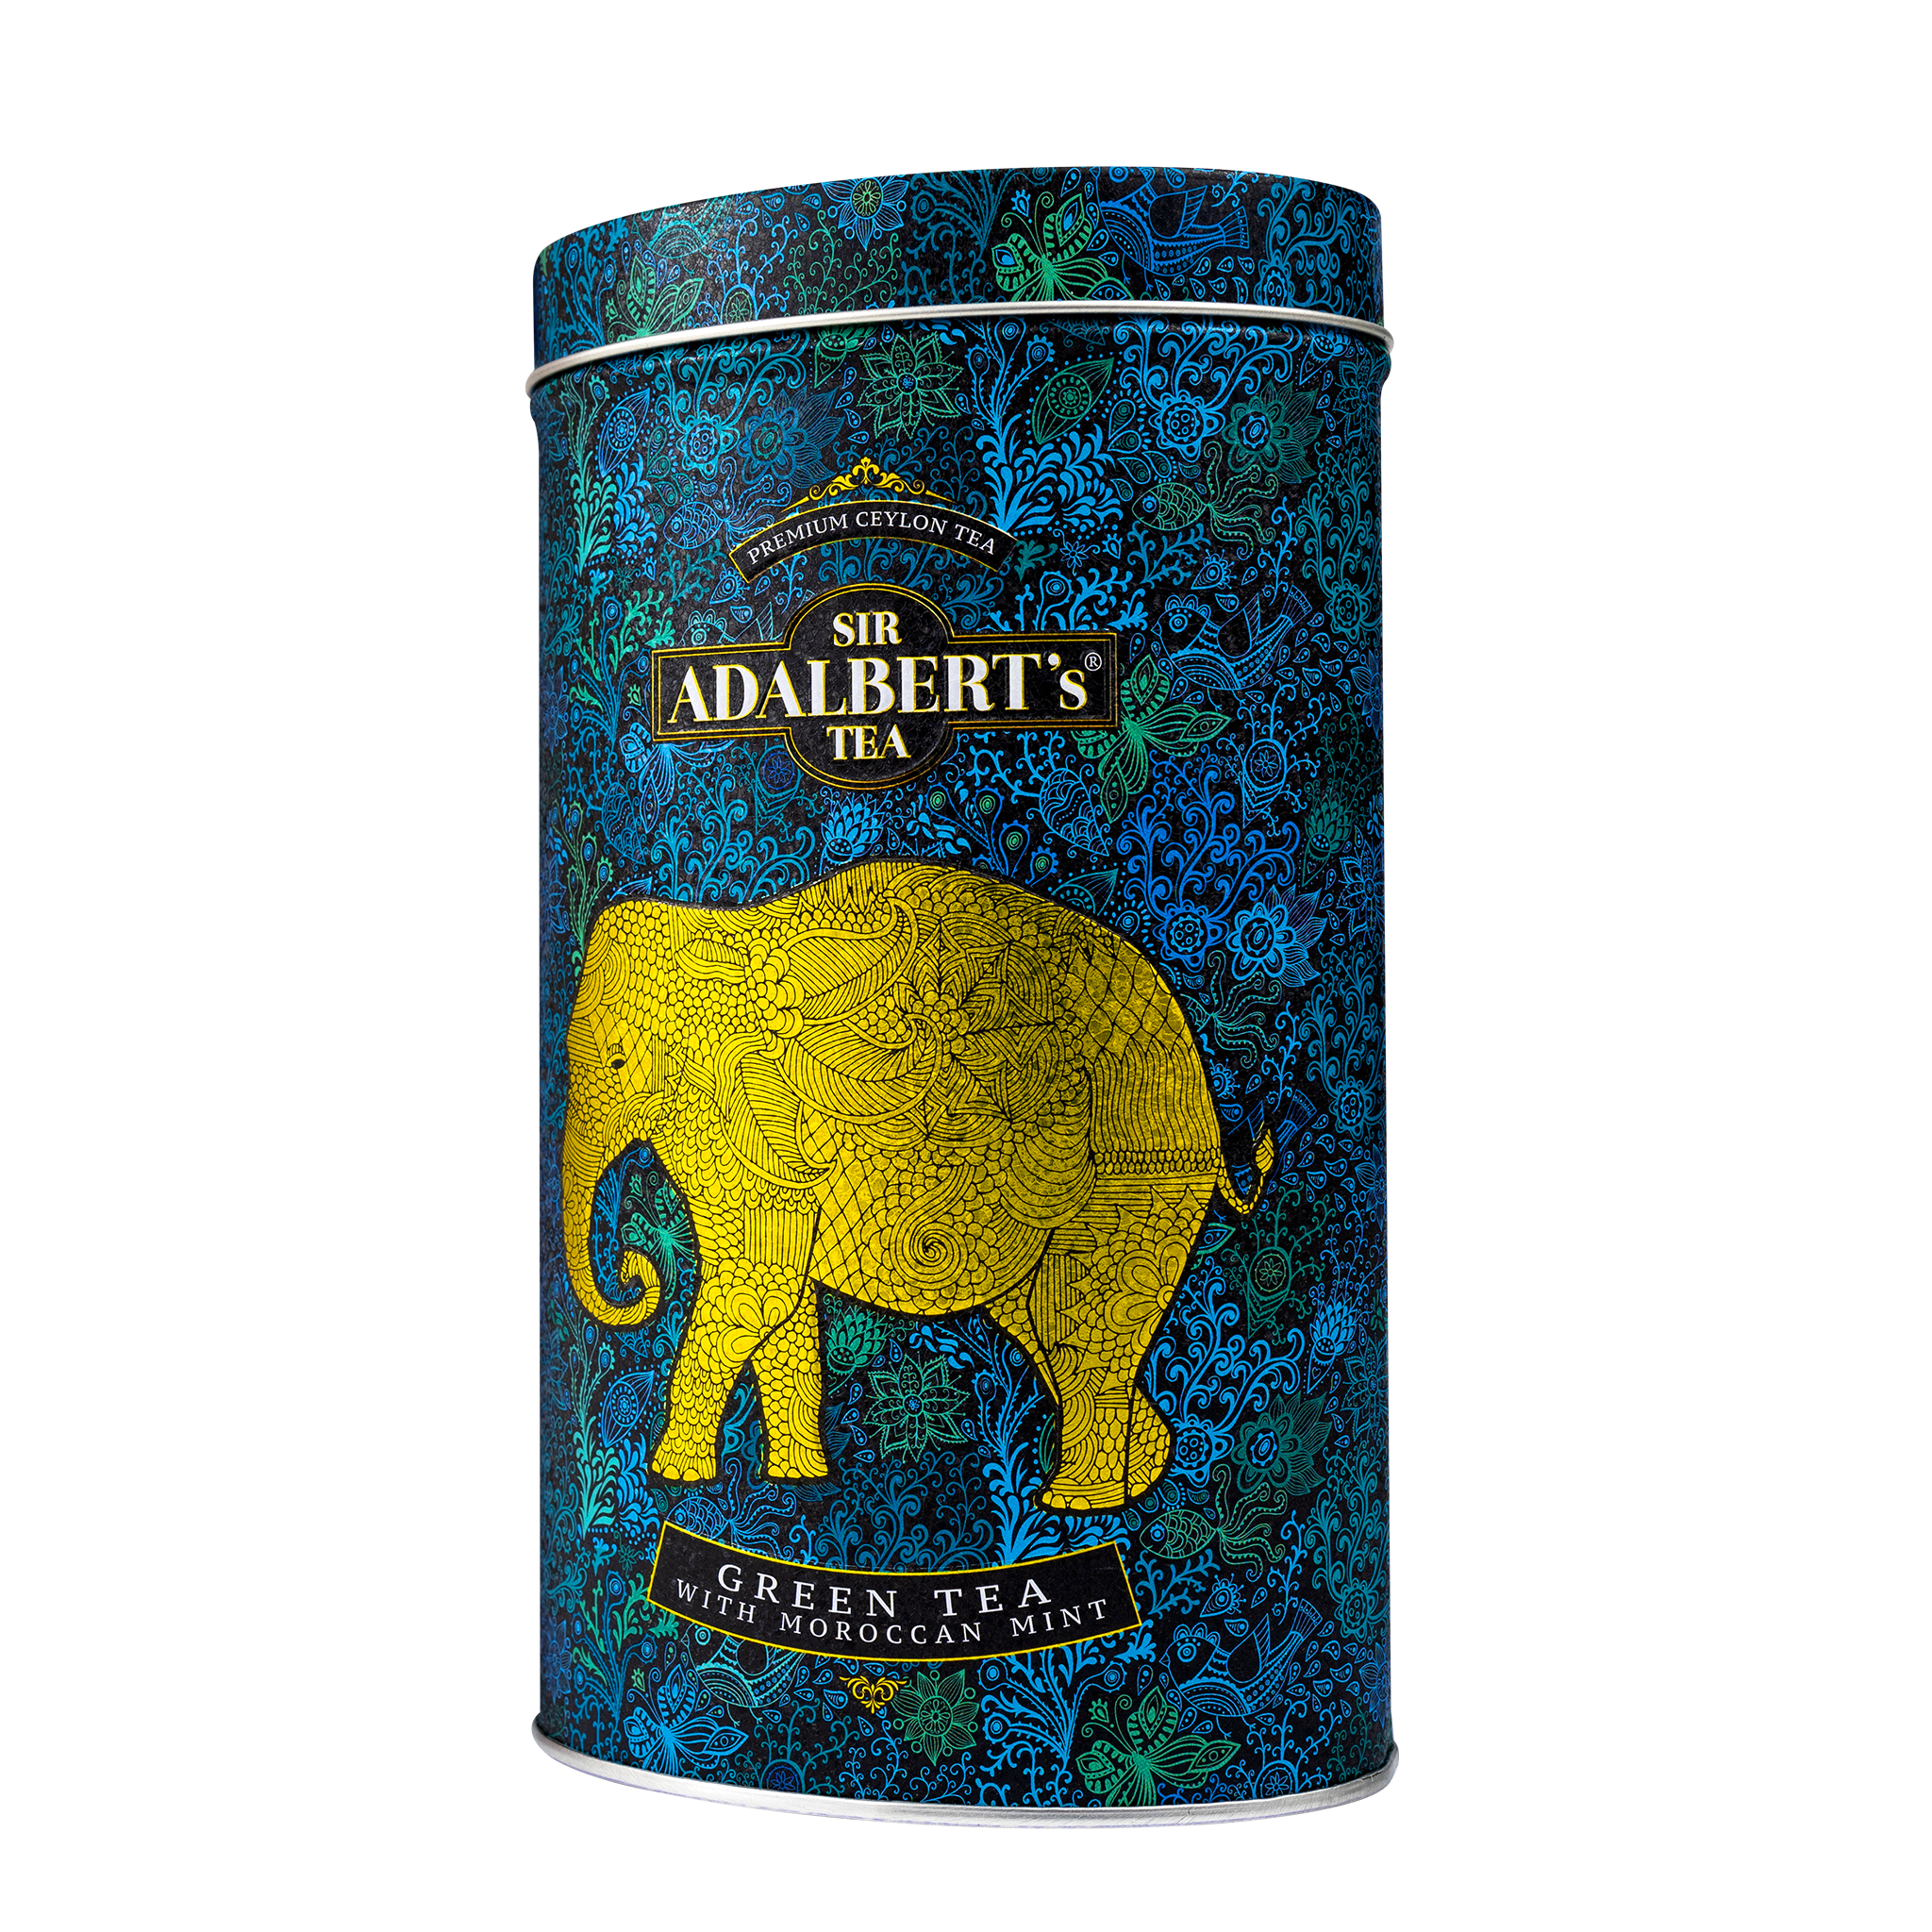 Adalbert's Tea Green Tea With Moroccan Mint - Leaf 110g in a can